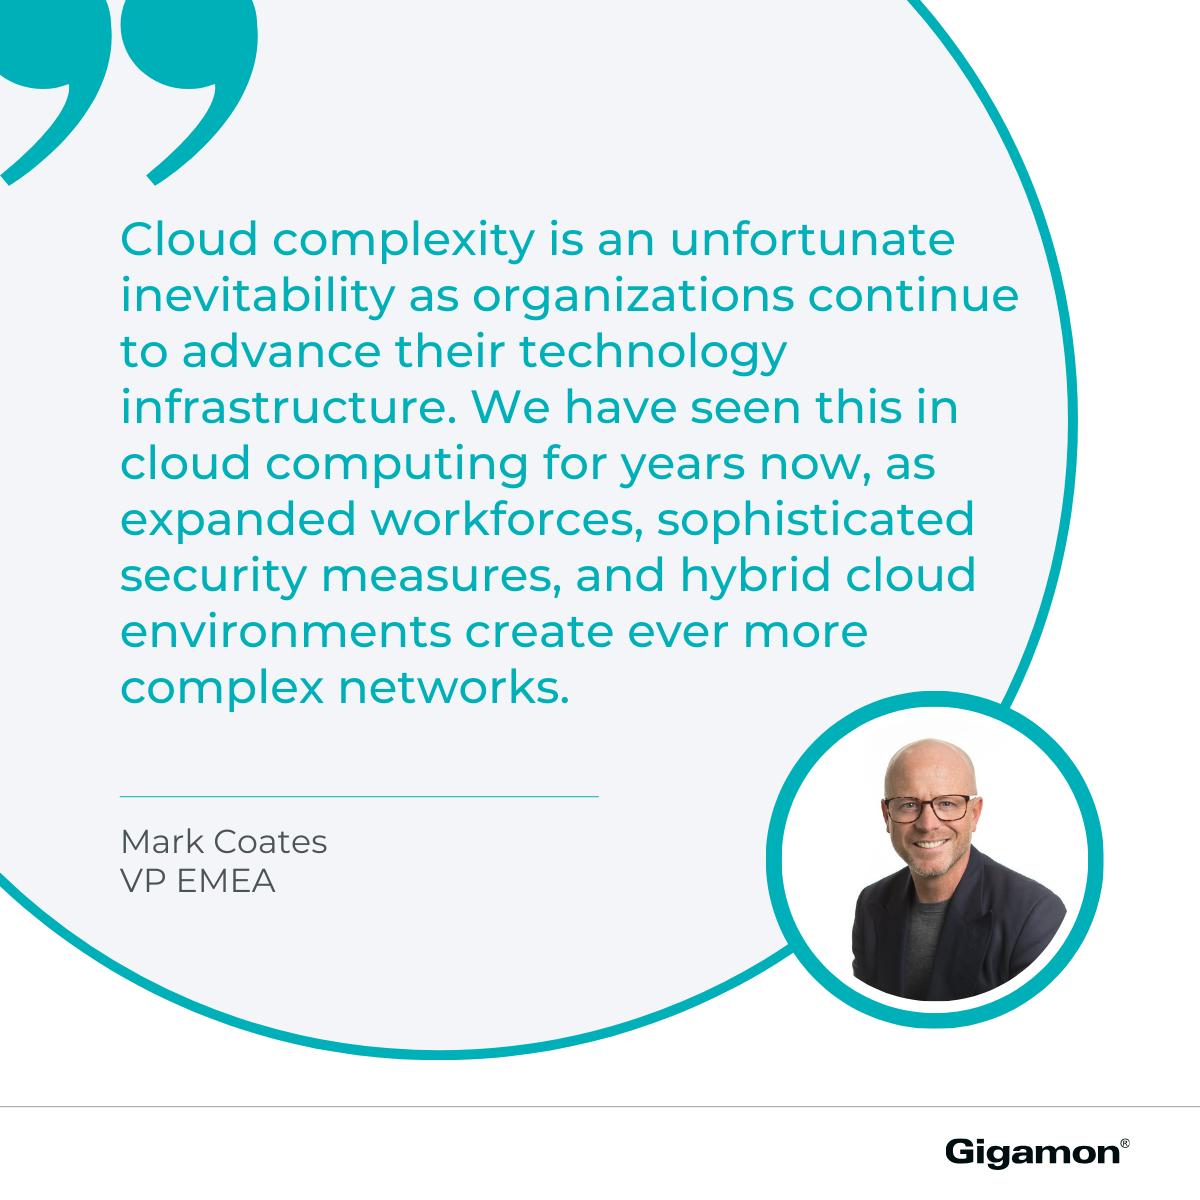 ☁️ Cloud complexity is inevitable, but savings are still possible by focusing on increasing tools and infrastructure efficiency.

Learn how to optimize your cloud environment: ow.ly/KRkL30sCbse

#HybridCloud #CloudSecurity